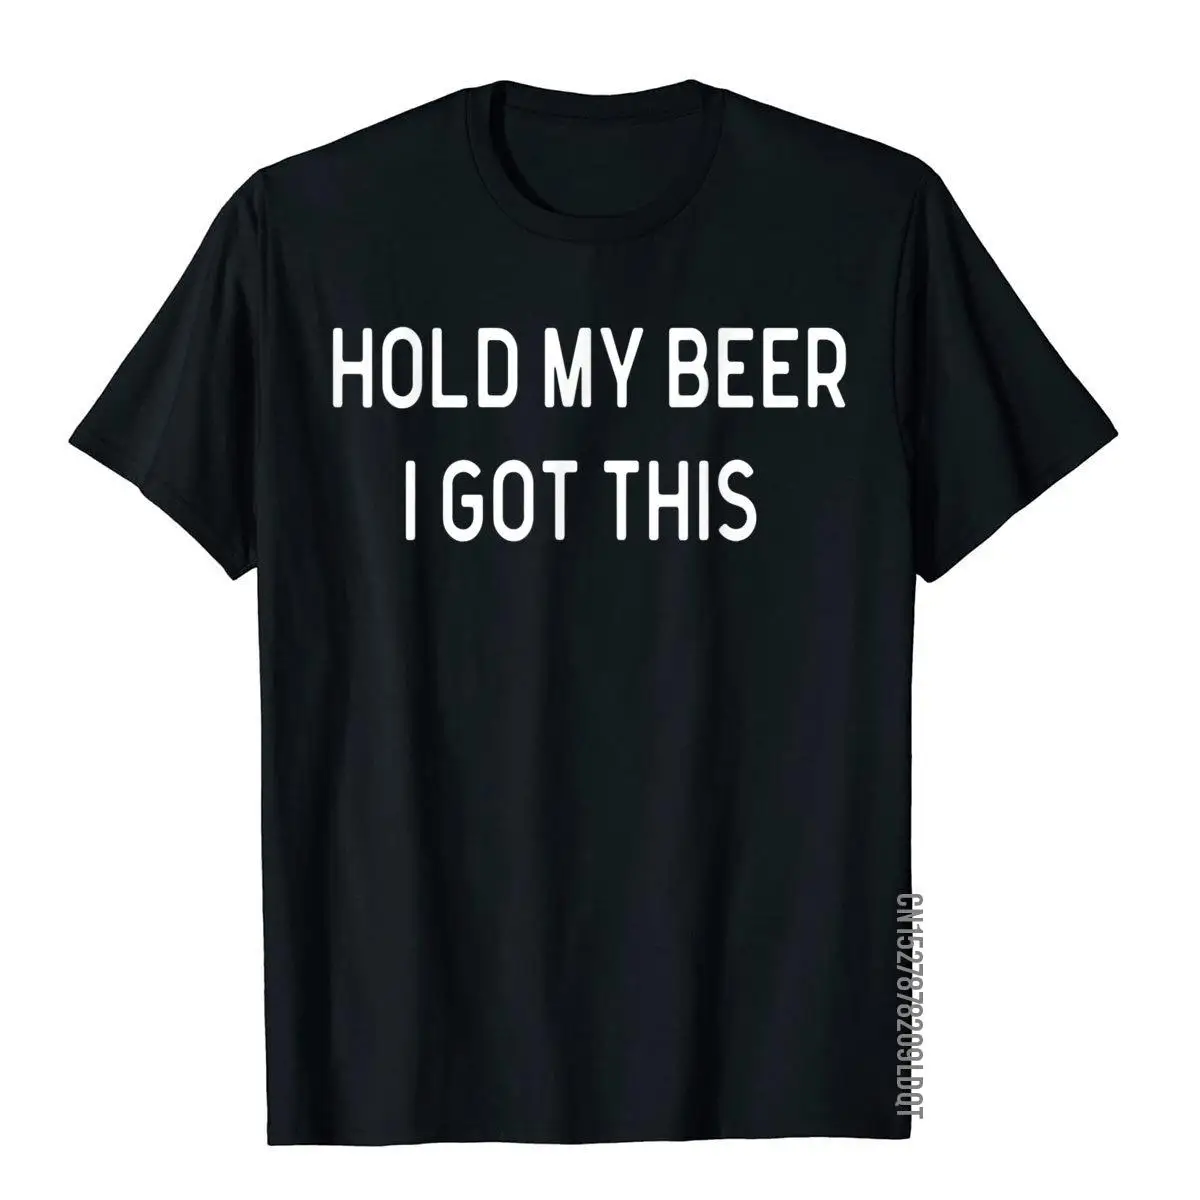 

Hold My Beer I Got This T-Shirt Funny Saying Sarcastic T Shirt For Men Summer Tops Tees Prevalent Fitness Cotton